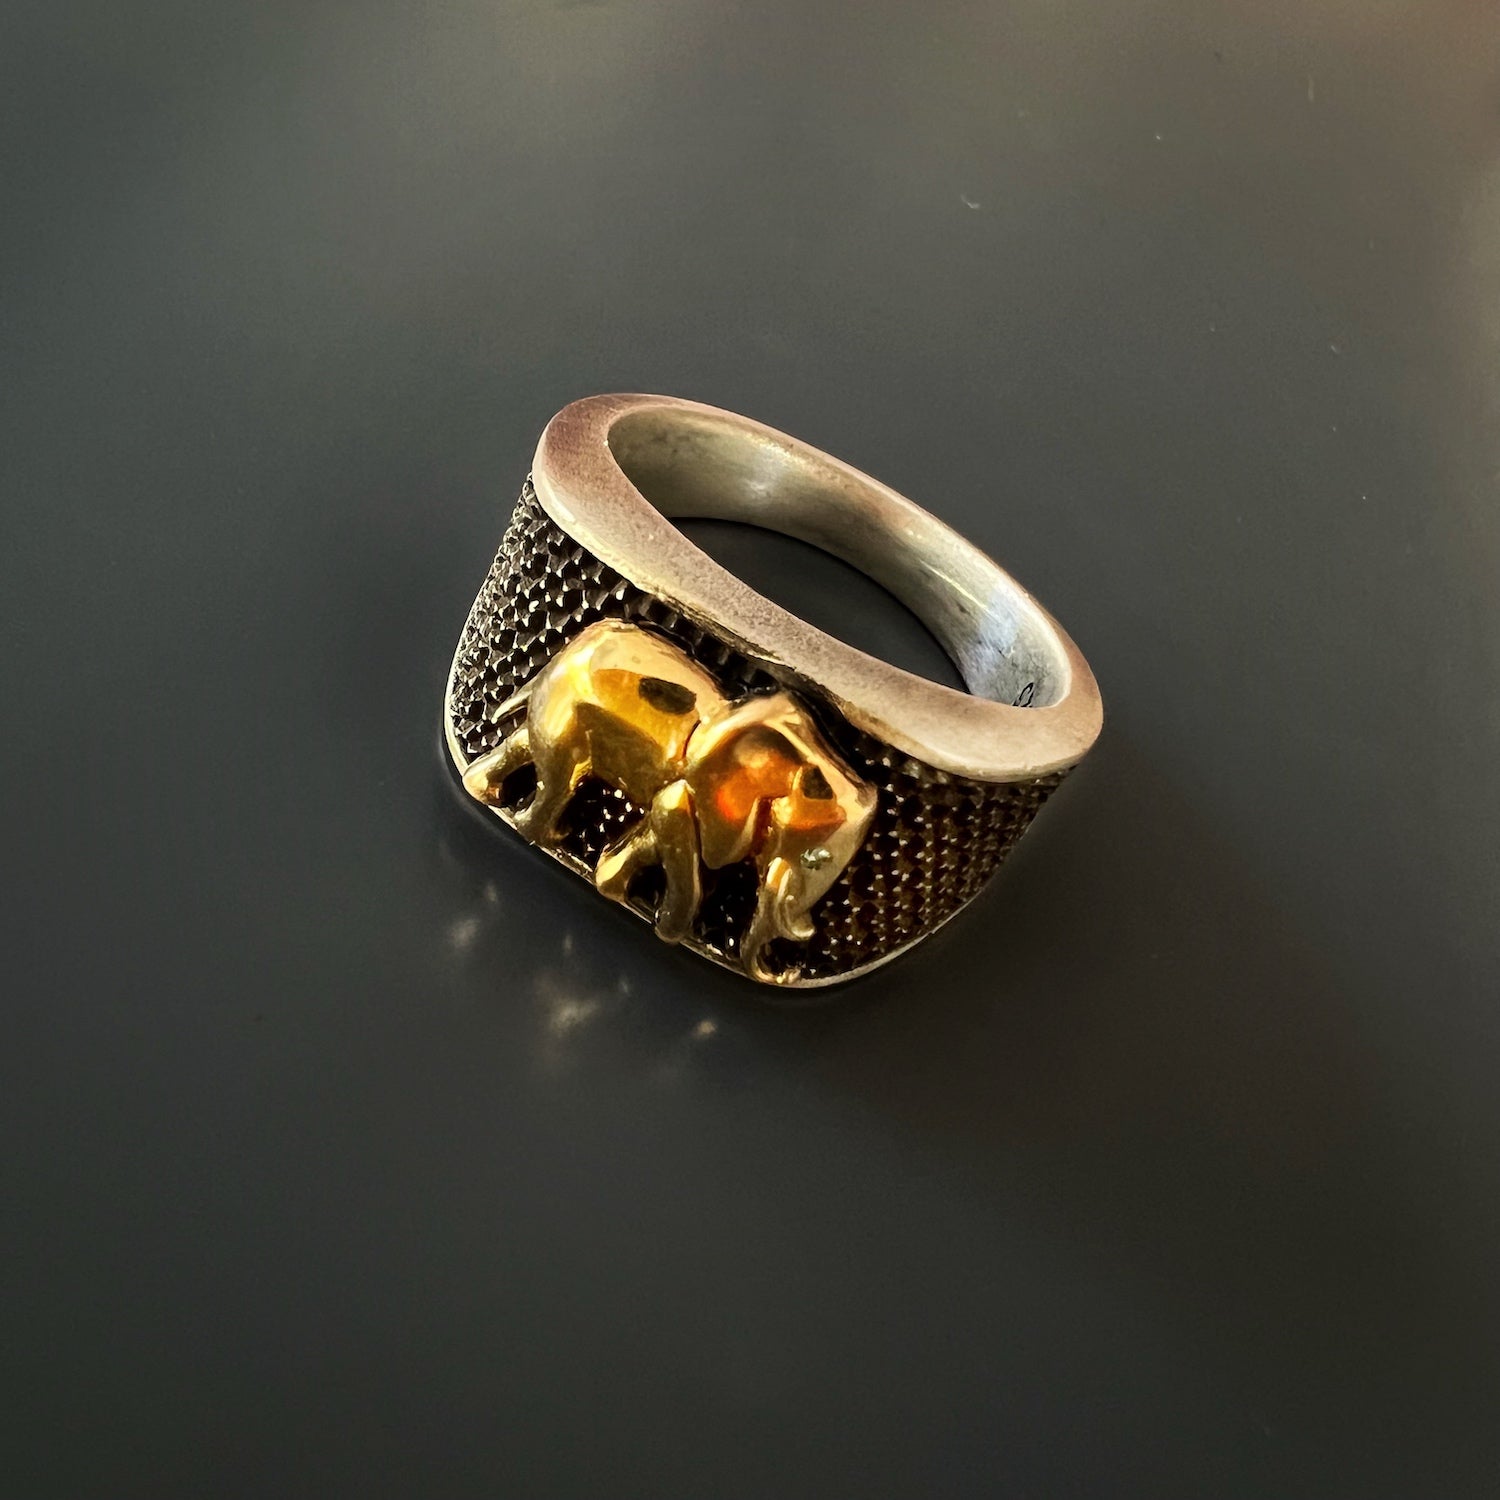 Made in the USA - Ring crafted with care in New York Atelier.